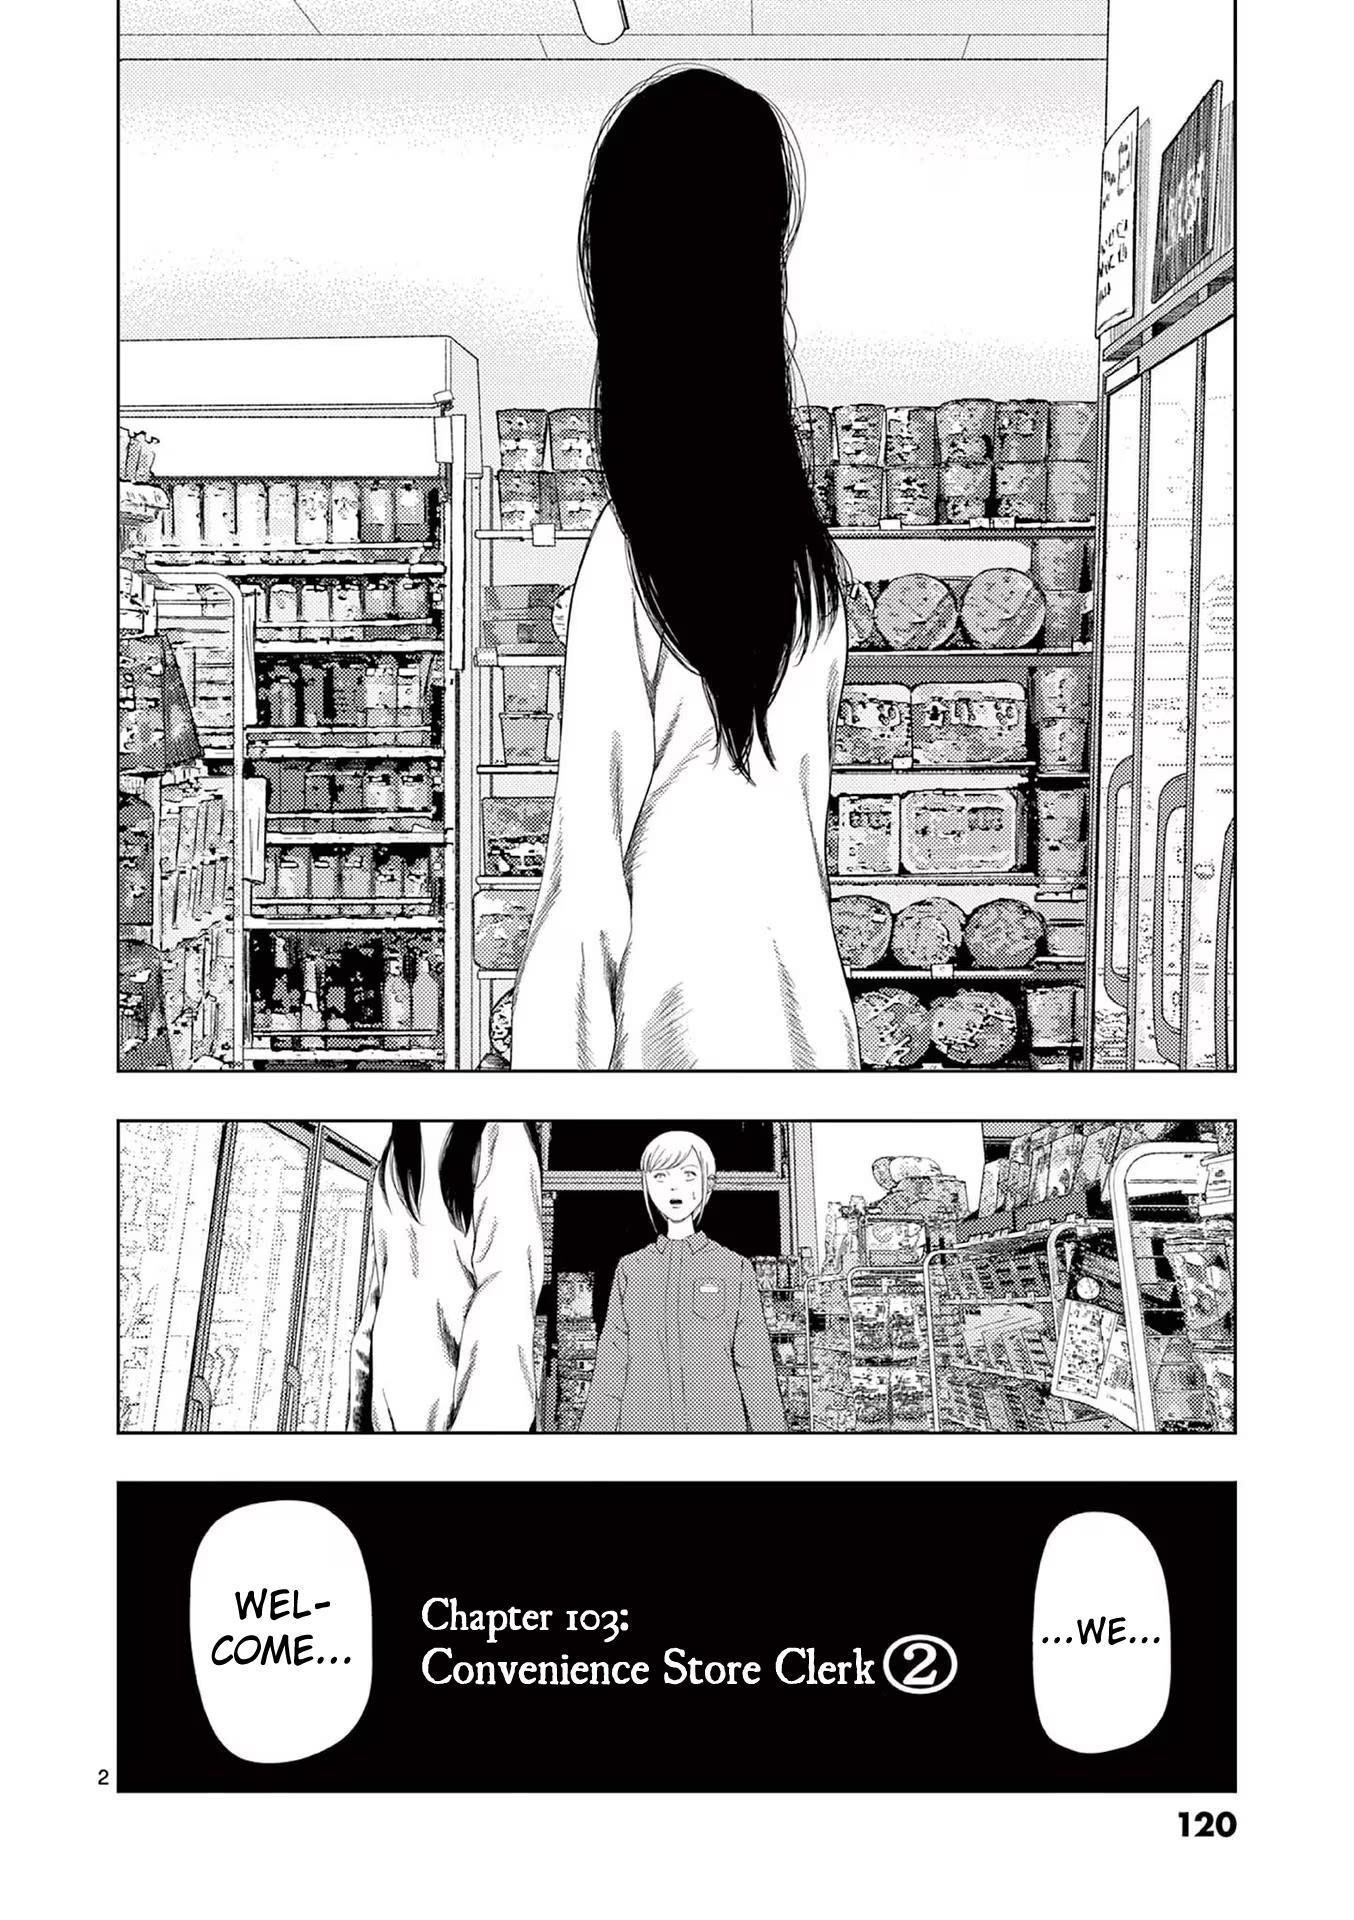 Ura Baito: Toubou Kinshi Vol.9 Chapter 103: Convenience Store Clerk ② - Picture 2